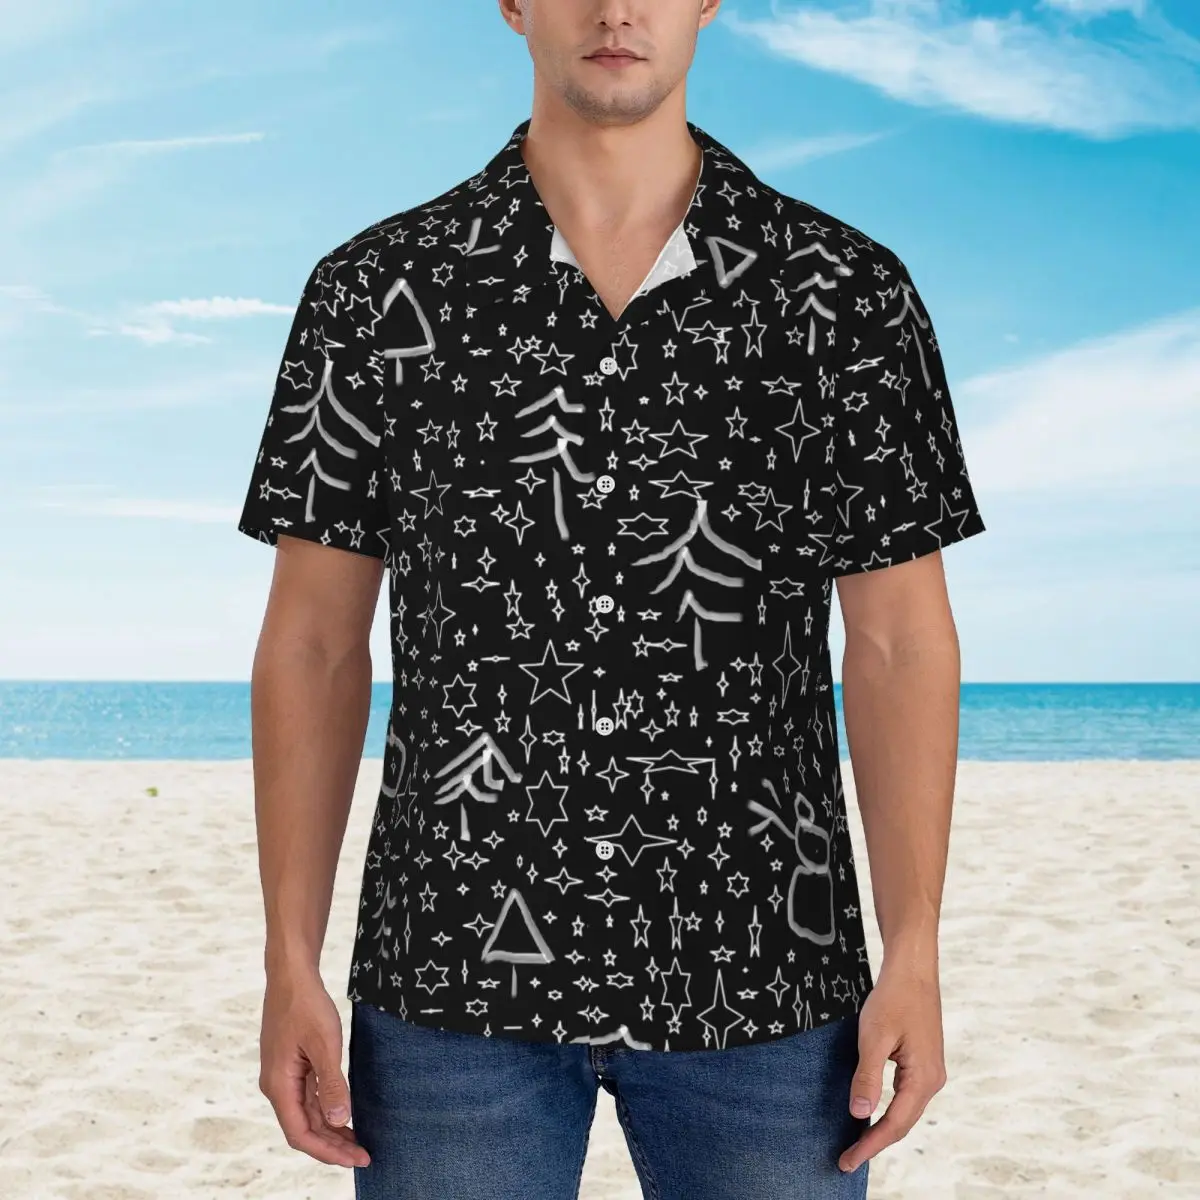 

Starry Night Beach Shirt Mens Cute Famous Painting Casual Shirts Hawaii Short Sleeve Graphic Trendy Oversize Blouses Gift Idea